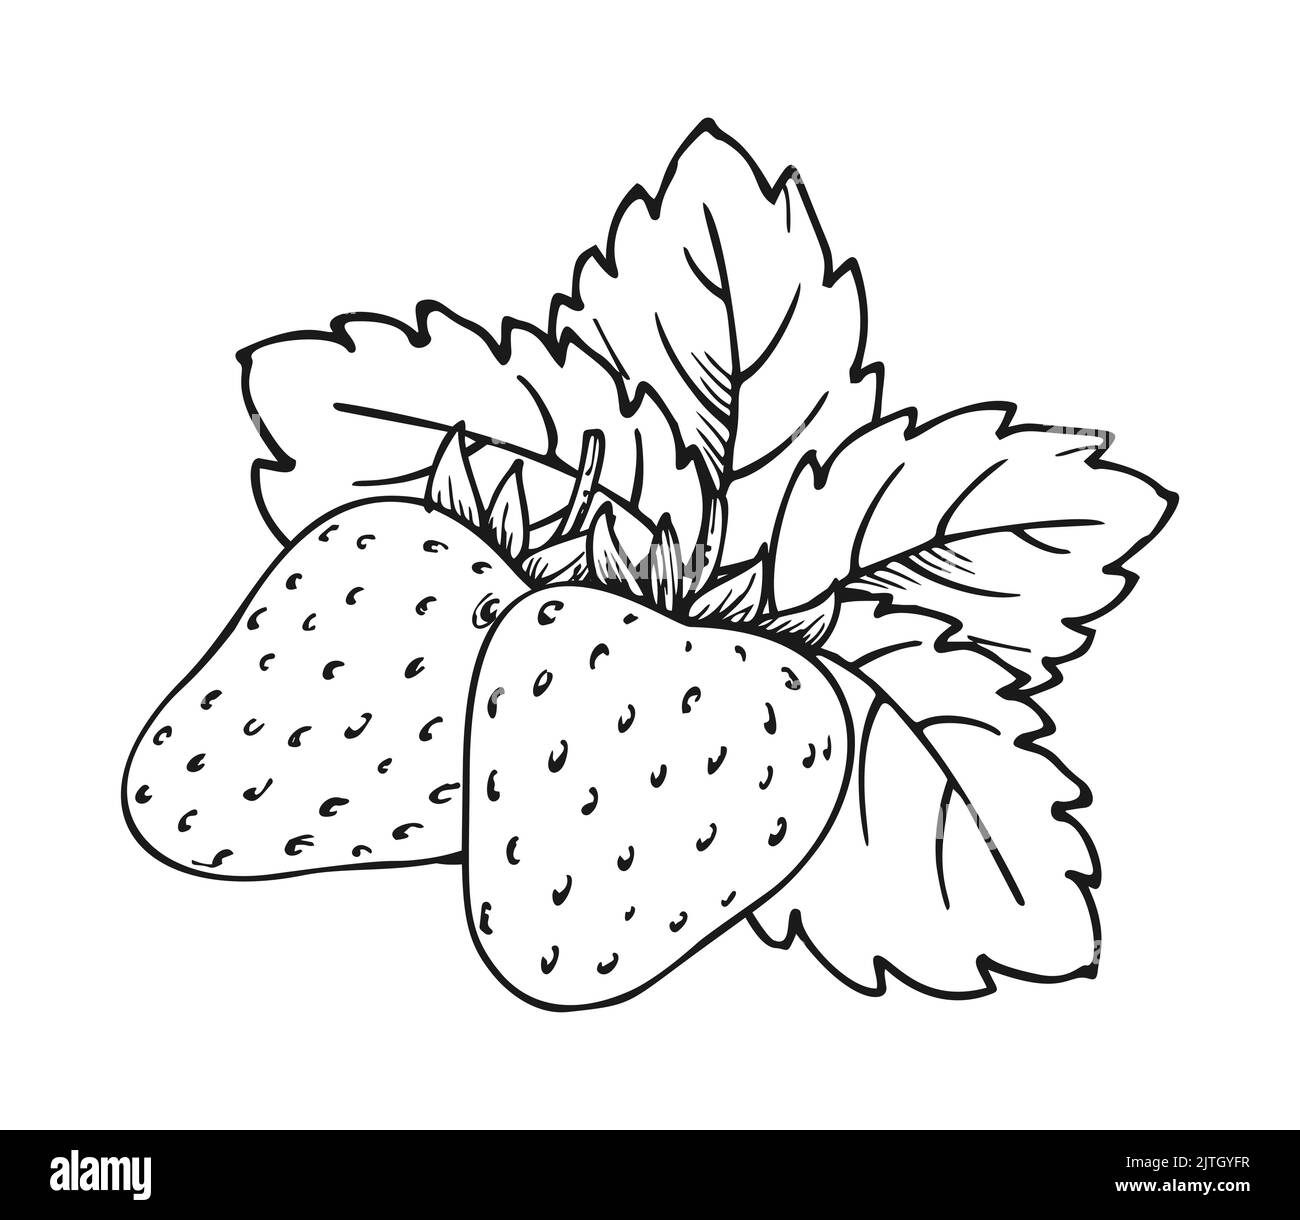 Strawberry bunch of two berries. Whole ripe wild forest berry with leaves. Tasty sweet fresh fruit. Children and adults coloring book page. Juicy stra Stock Vector